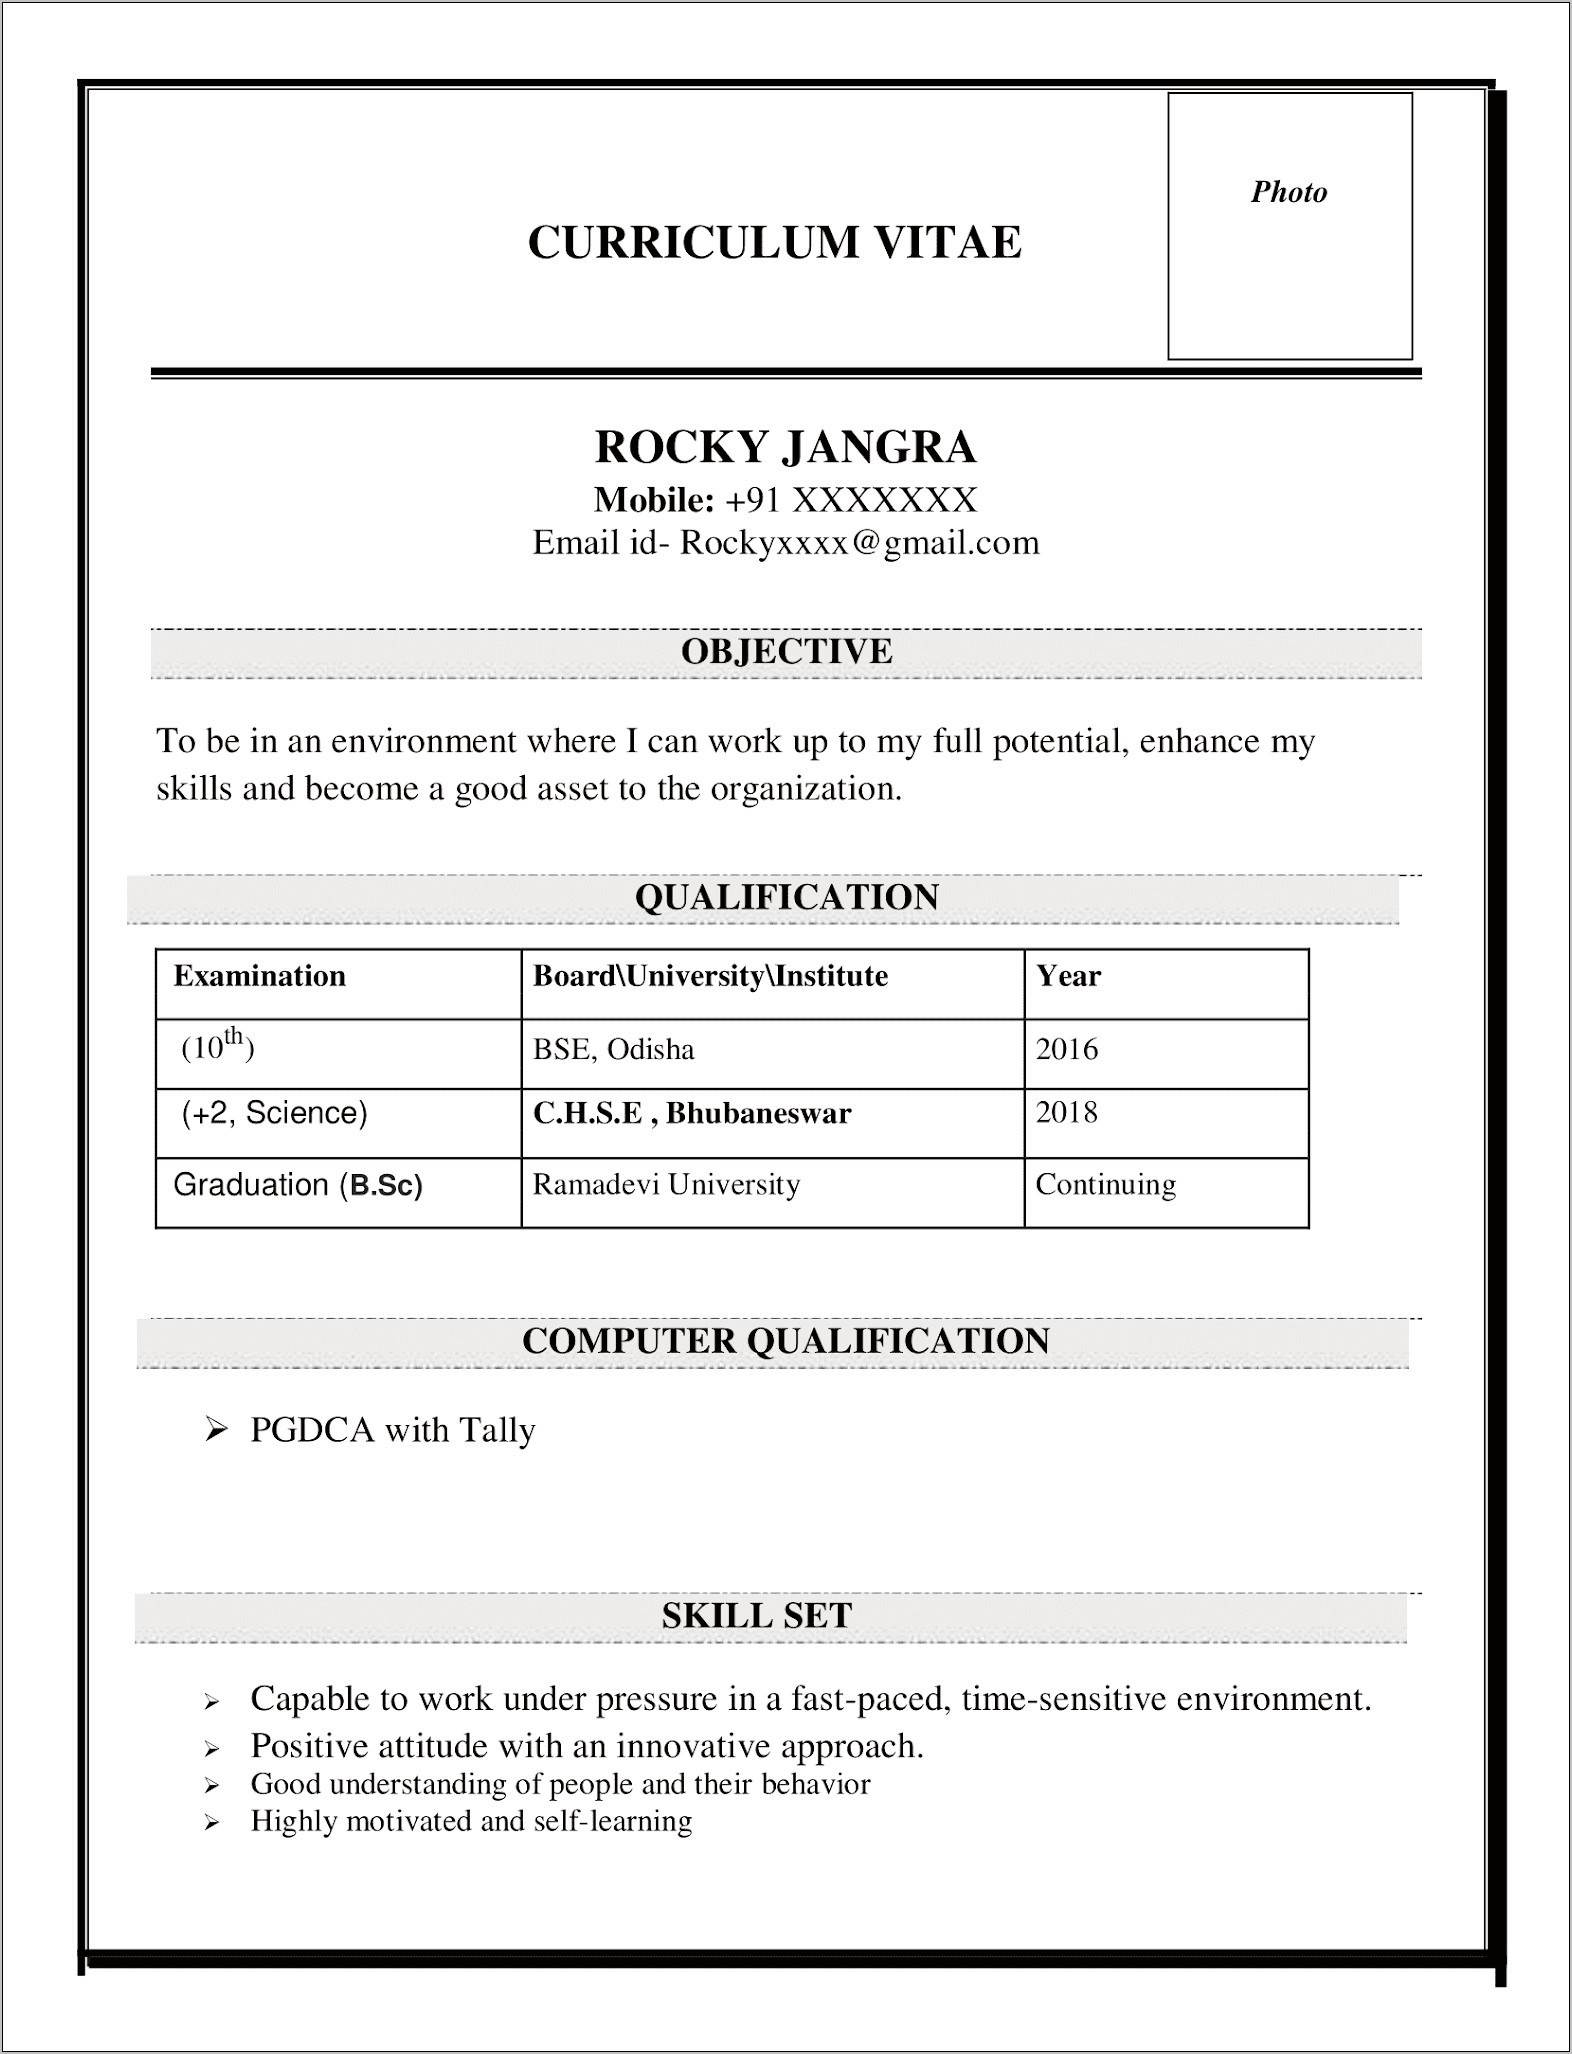 Resume With Photo In Word Format Download